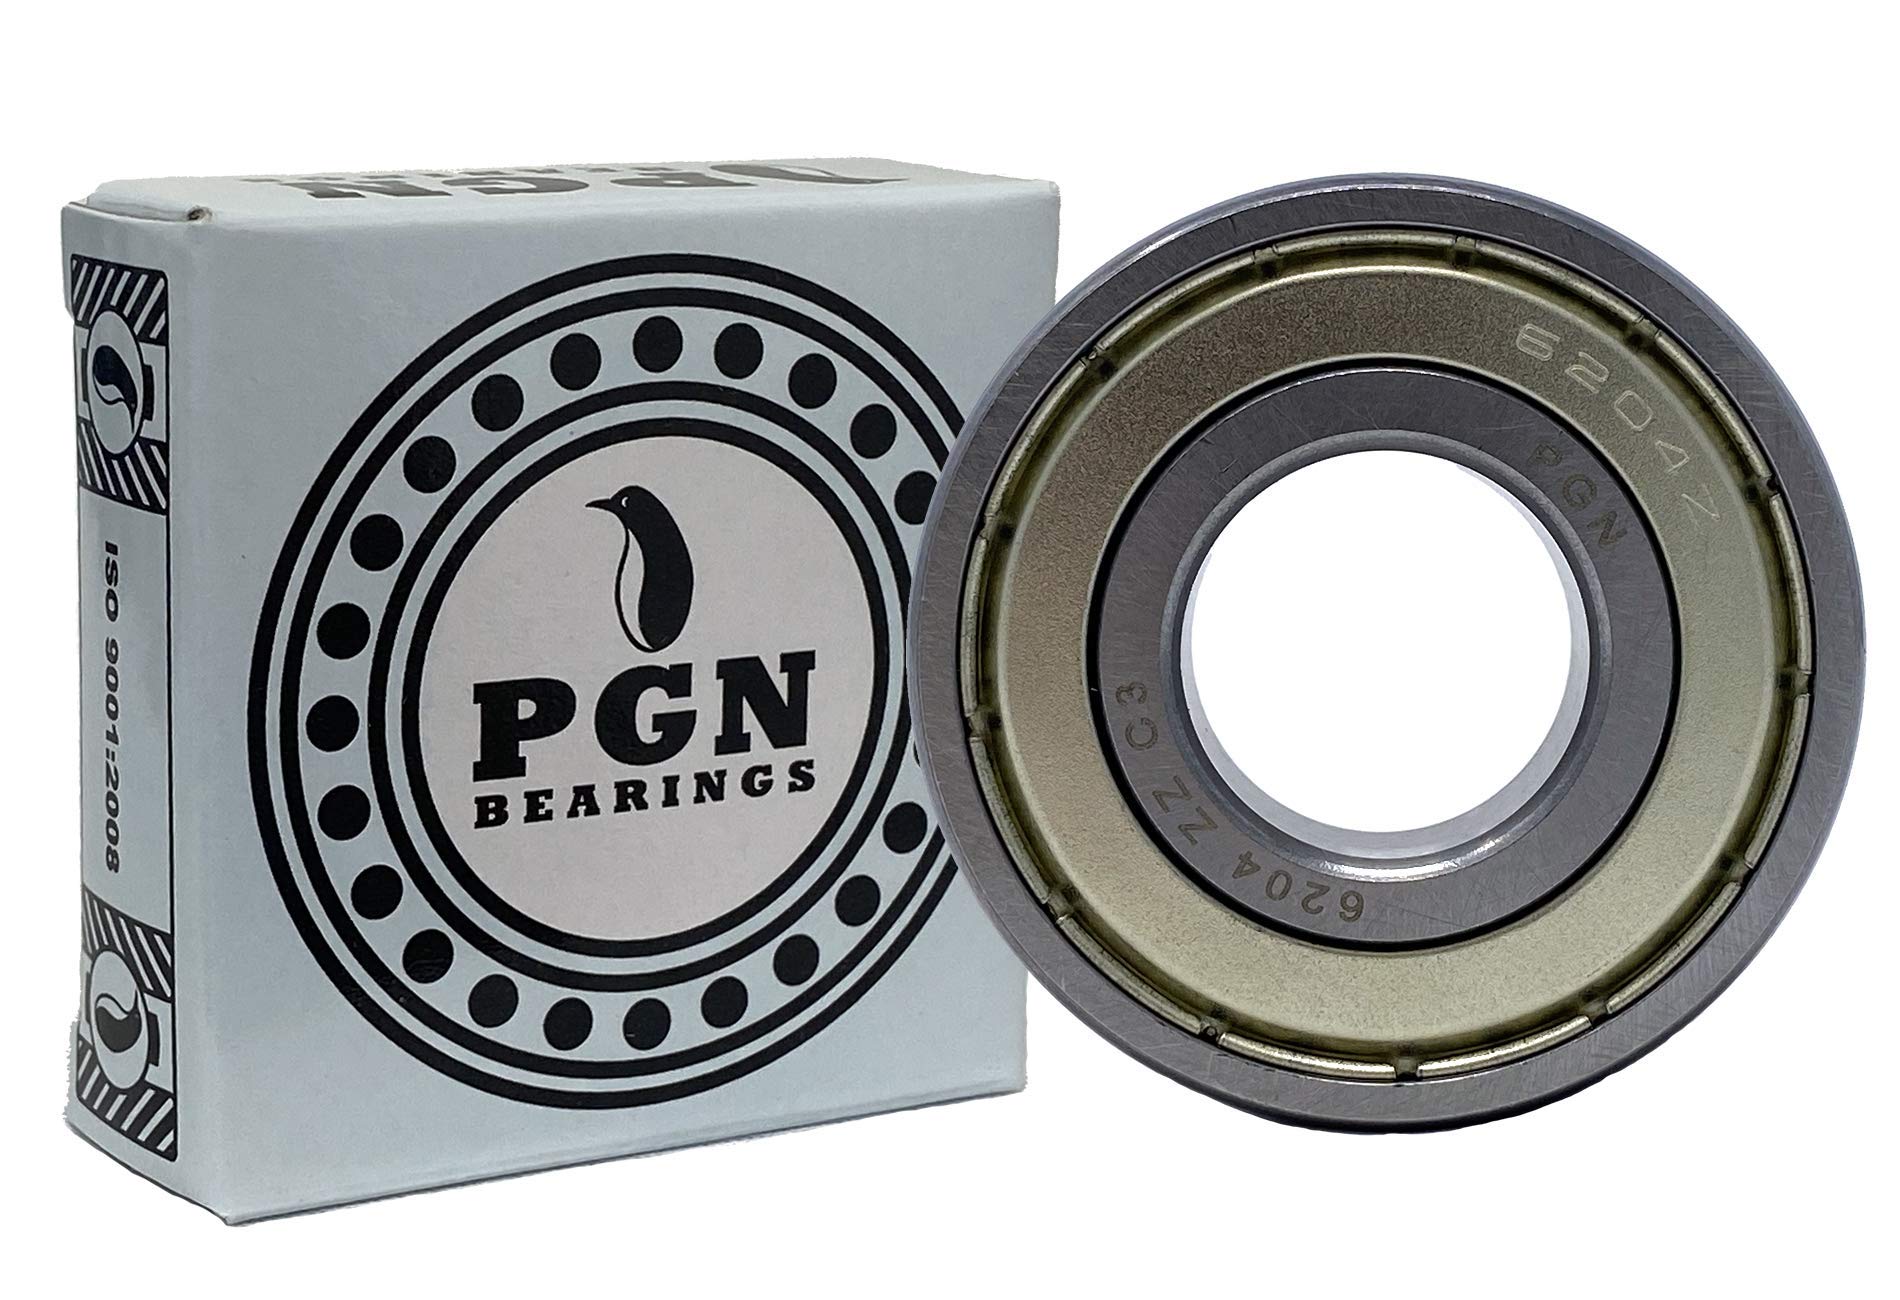 PGN Bearings (2 Pack) Pgn 6204-Zz Shielded Ball Bearing - C3-20X47X14 - Chrome Steel - Lubricated